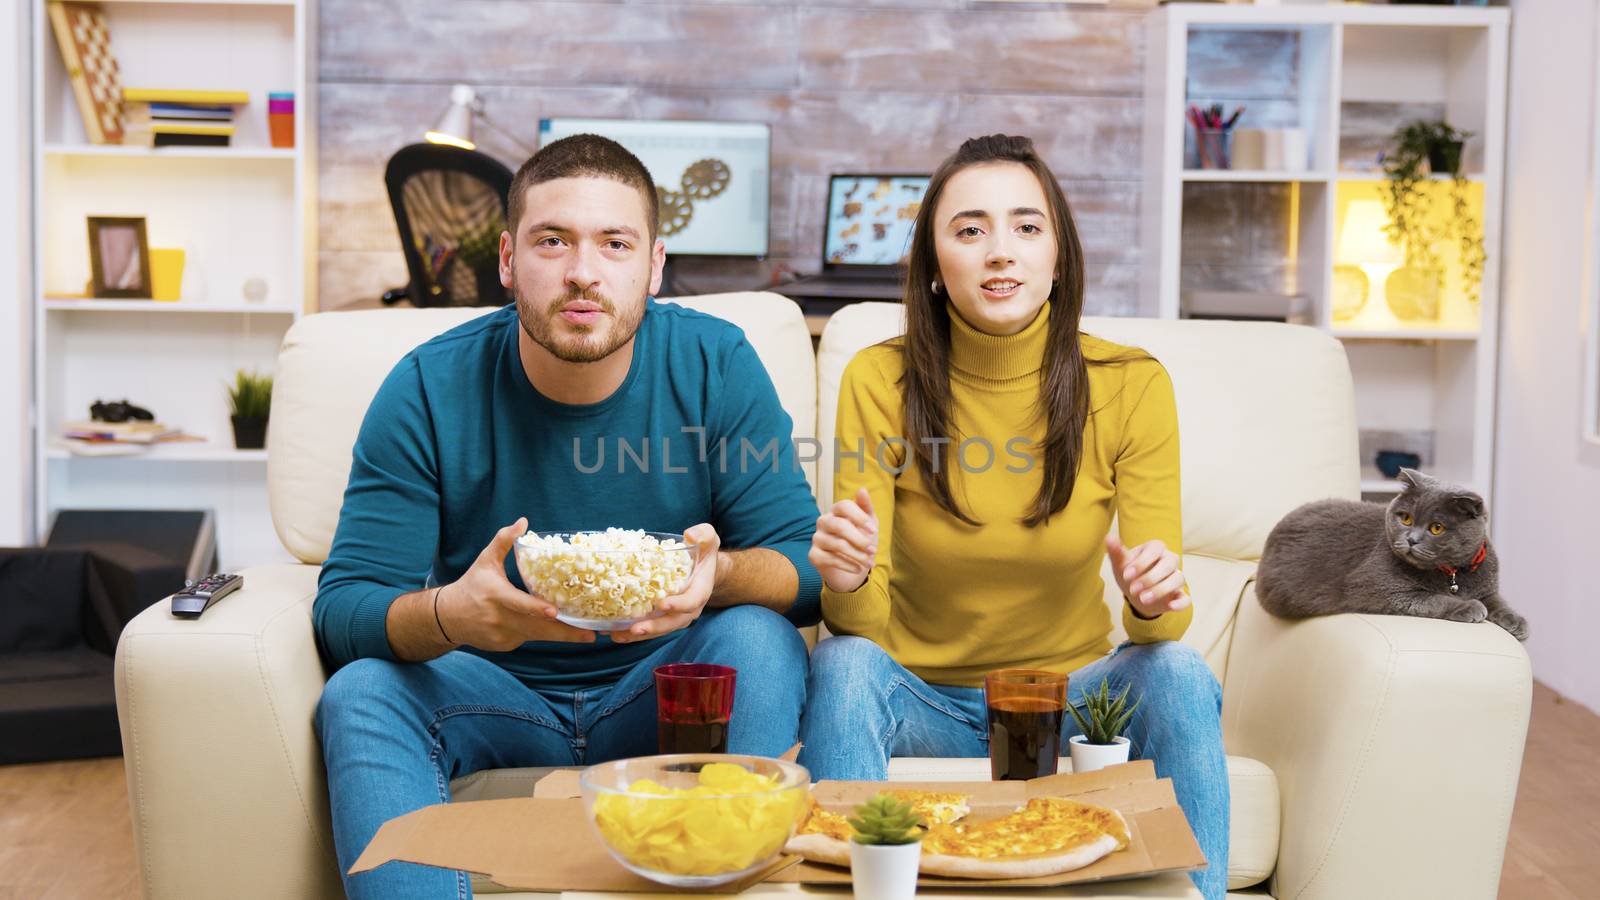 Excited couple sitting on the couch eating junk food and cheering up for their sport team while watching tv. Cat sitting on the sofa.